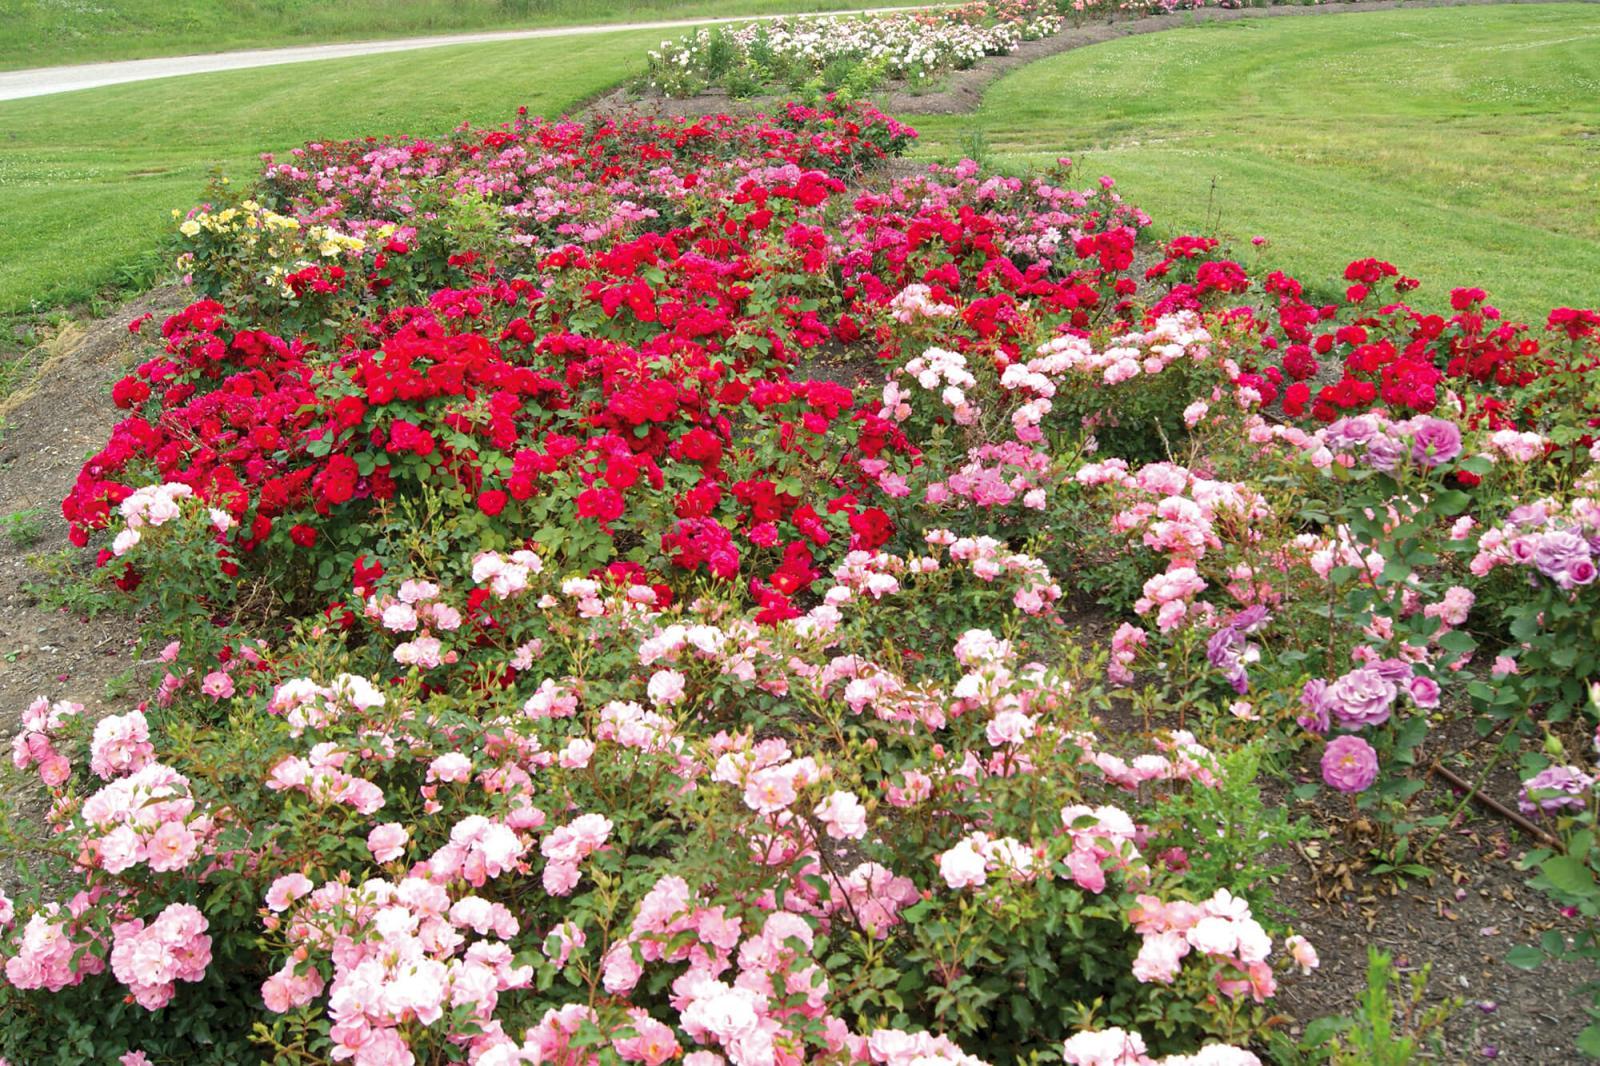 Over 600 roses were donated by JC Bakker and Sons of St. Catharines to the Landscape Ontario trial gardens.